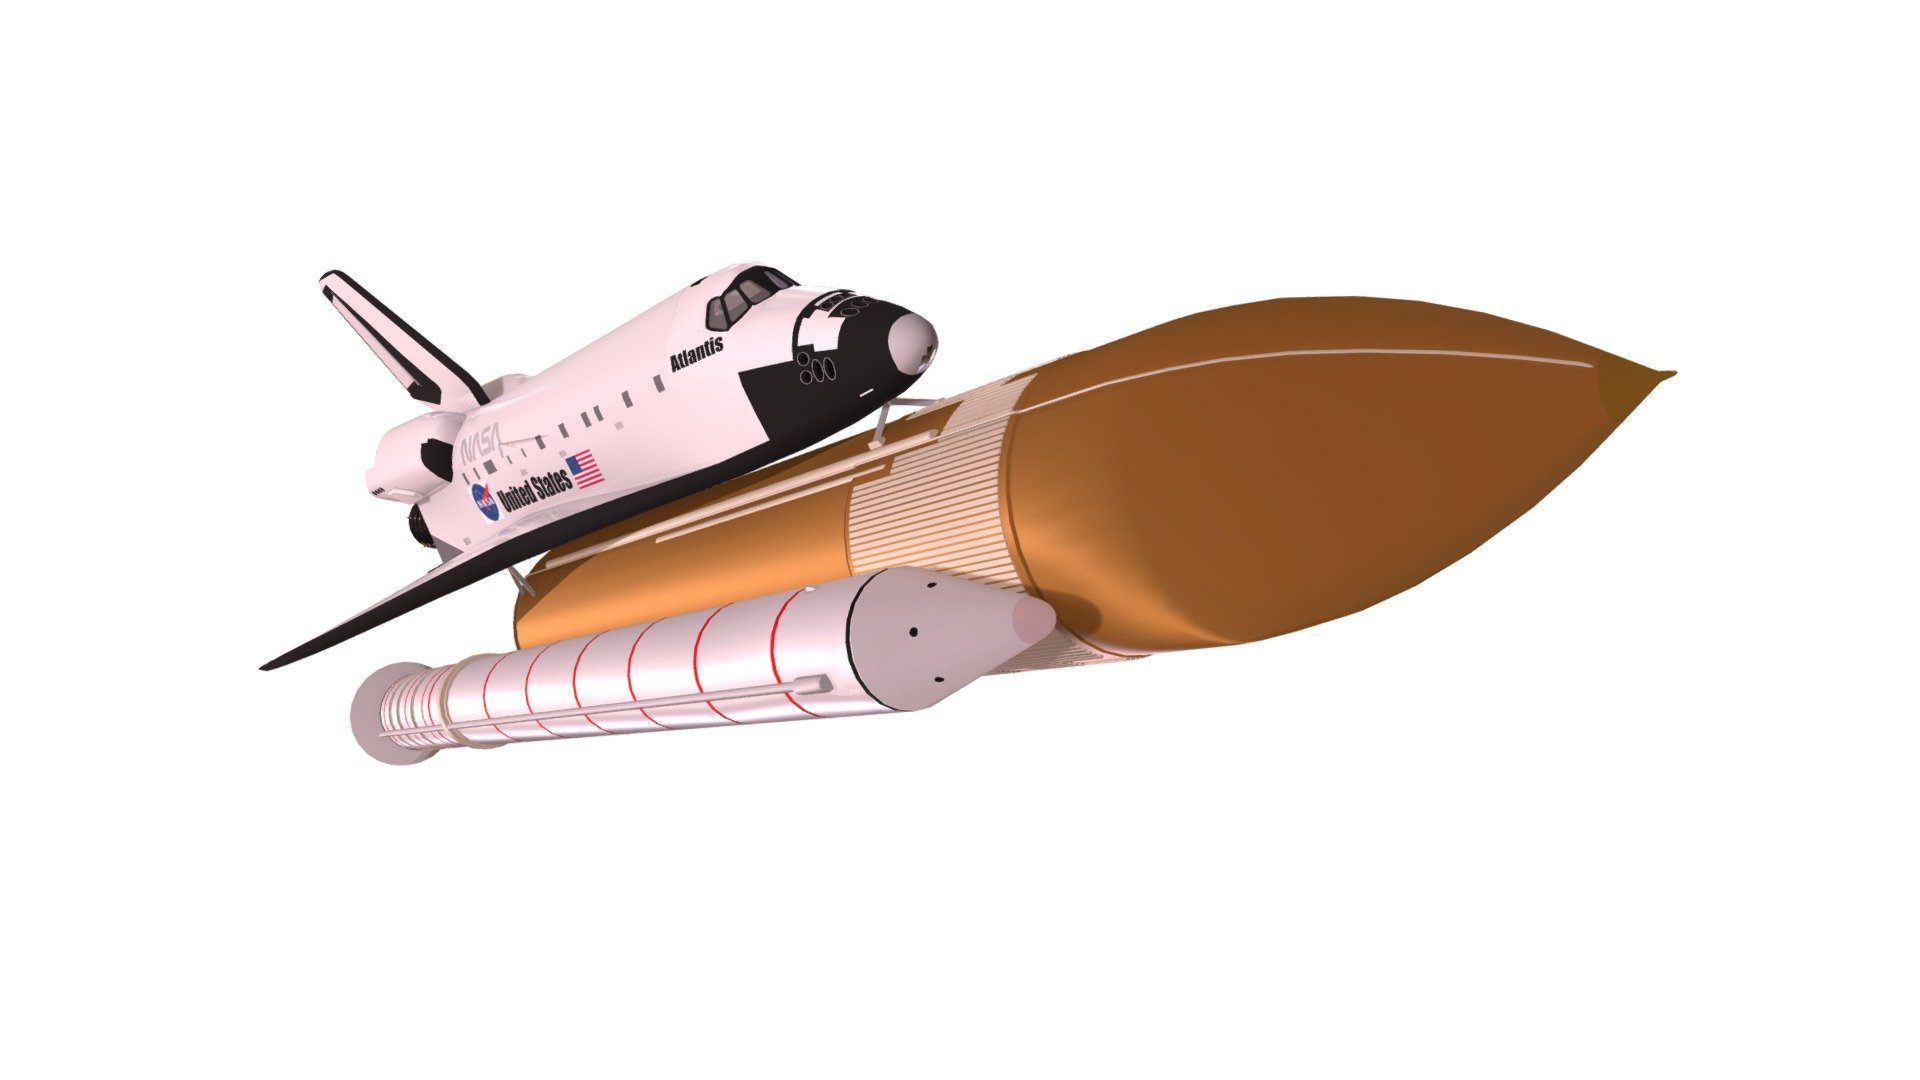 This 3D model depicts the legendary space shuttle Atlantis, which served NASA for many years. Detailed mapping allows you to get acquainted with the characteristic features of this iconic space machine. Perfect for use in projects related to astronautics, education or historical visualizations 3d model